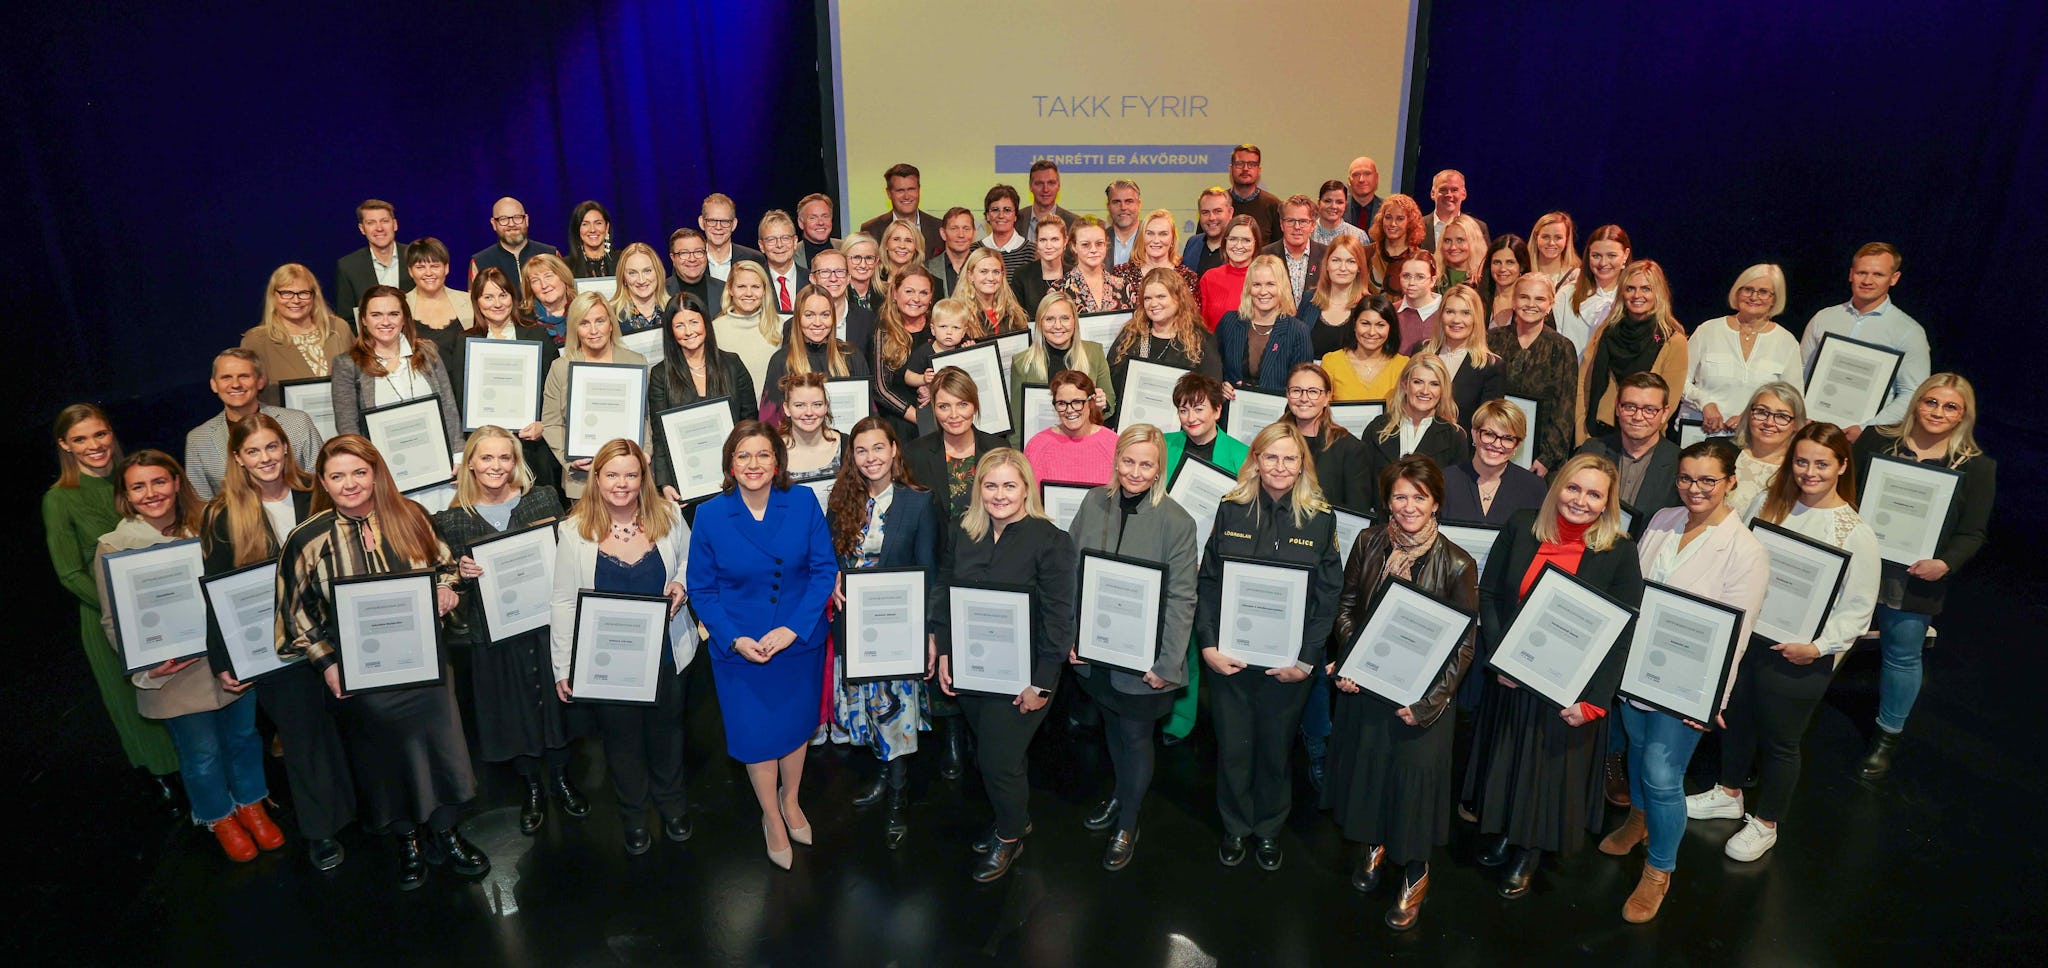 A large group of people posing together, many holding certificate with a yellow background that reads "TAKK FYRIR"